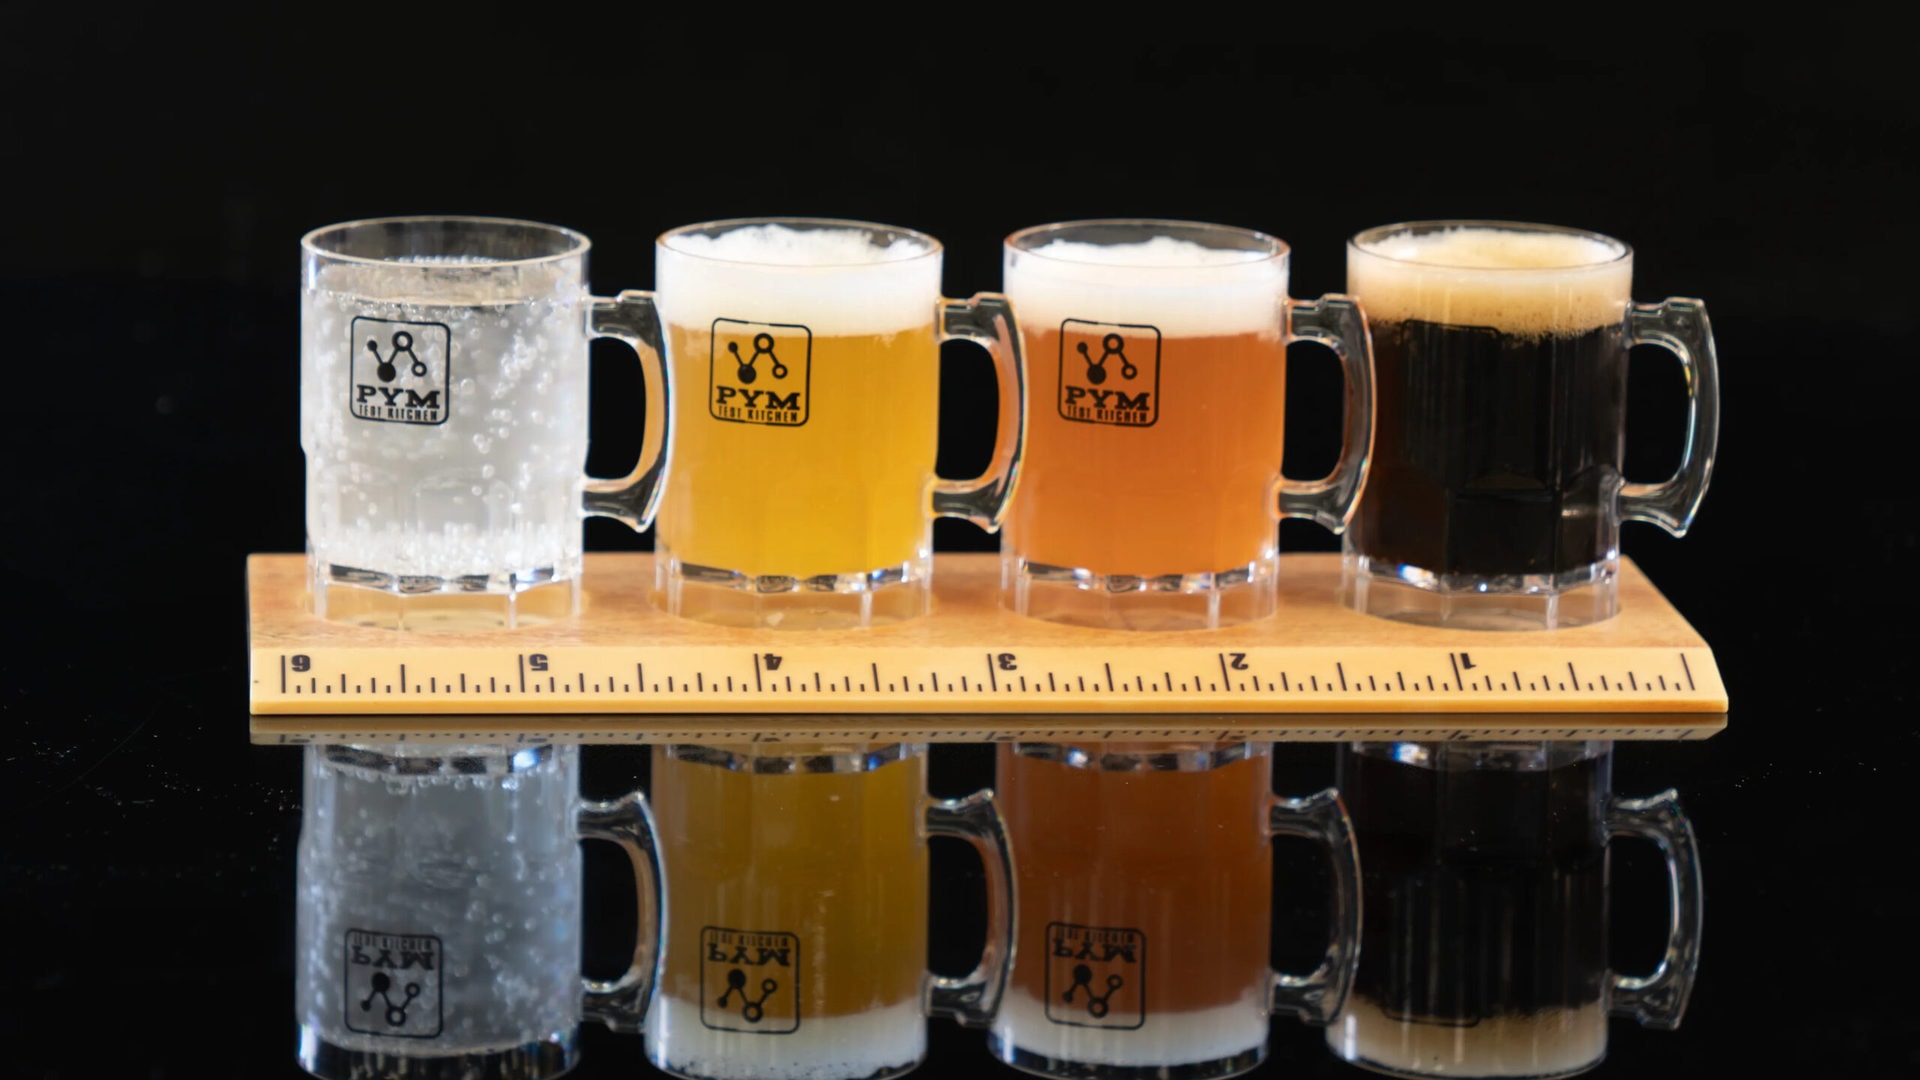 Tiny beer steins sitting on an over-sized ruler